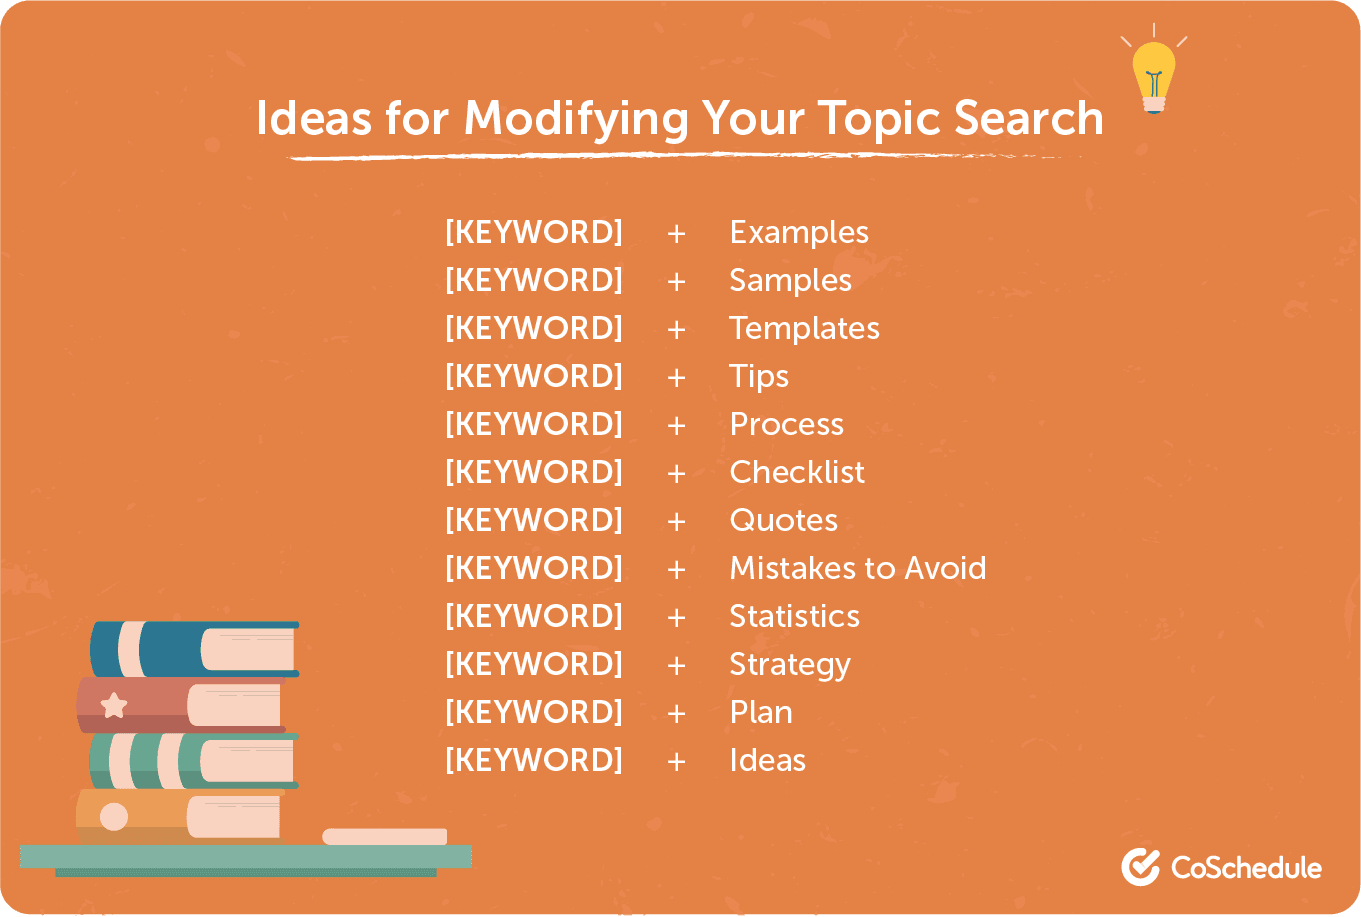 Ideas for modifying your topic search